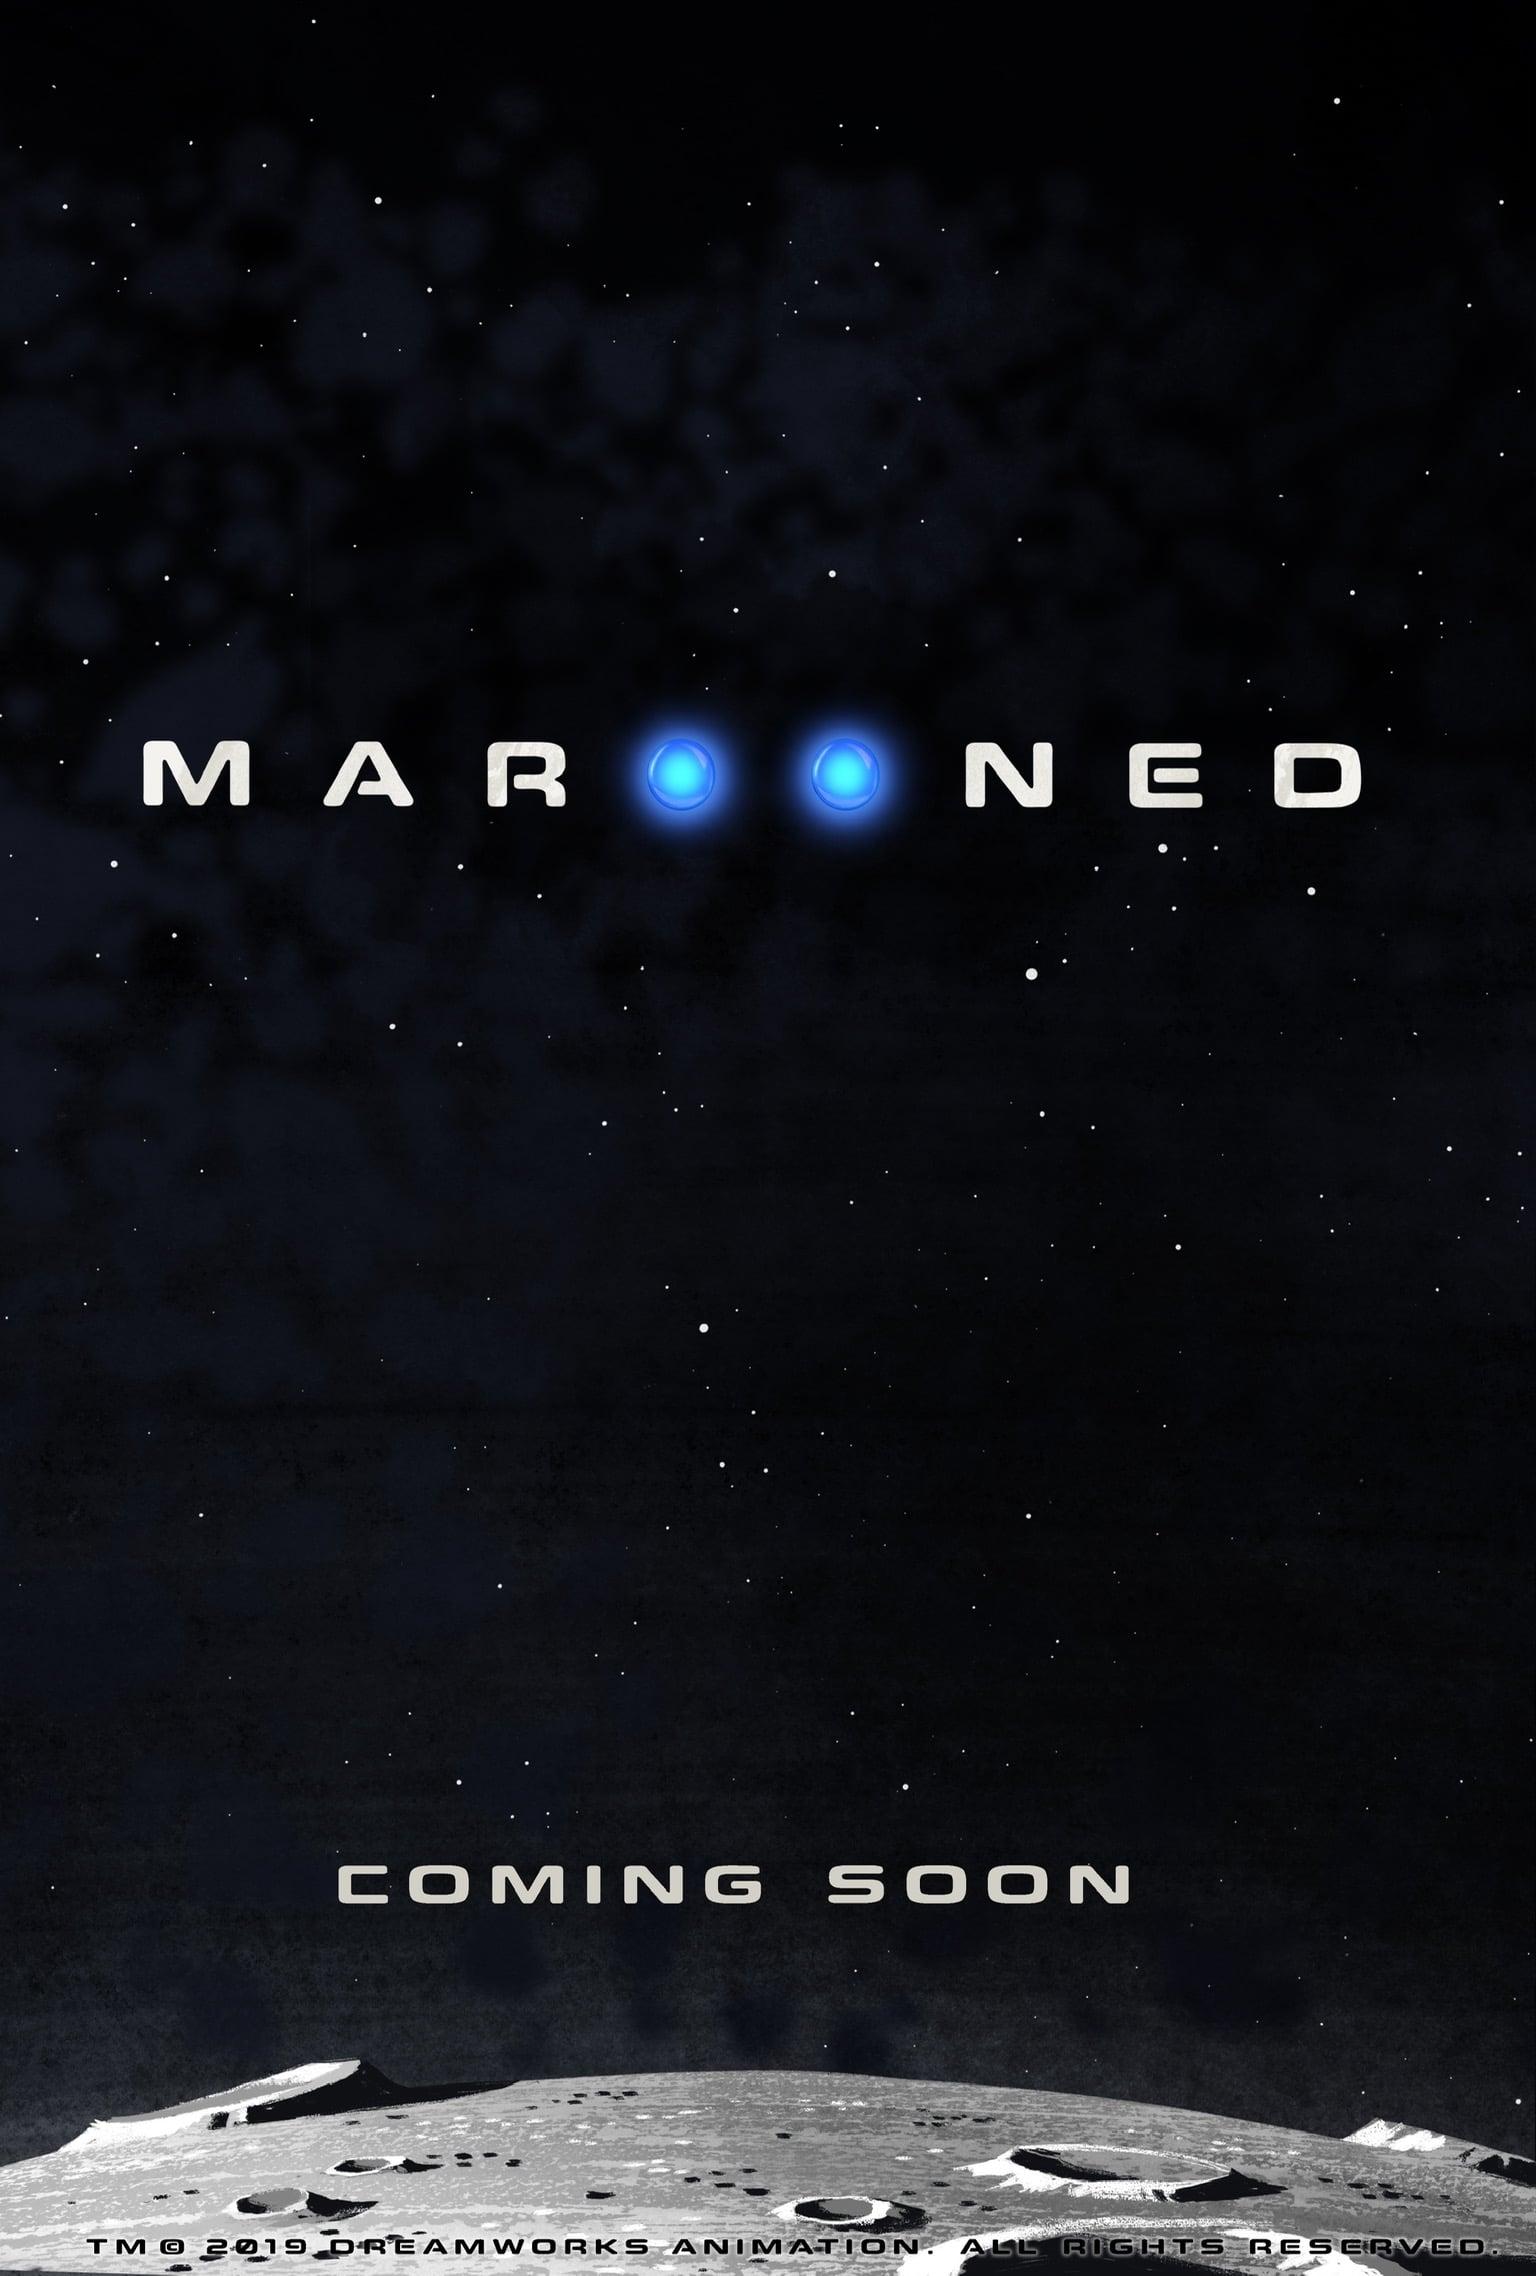 Marooned poster